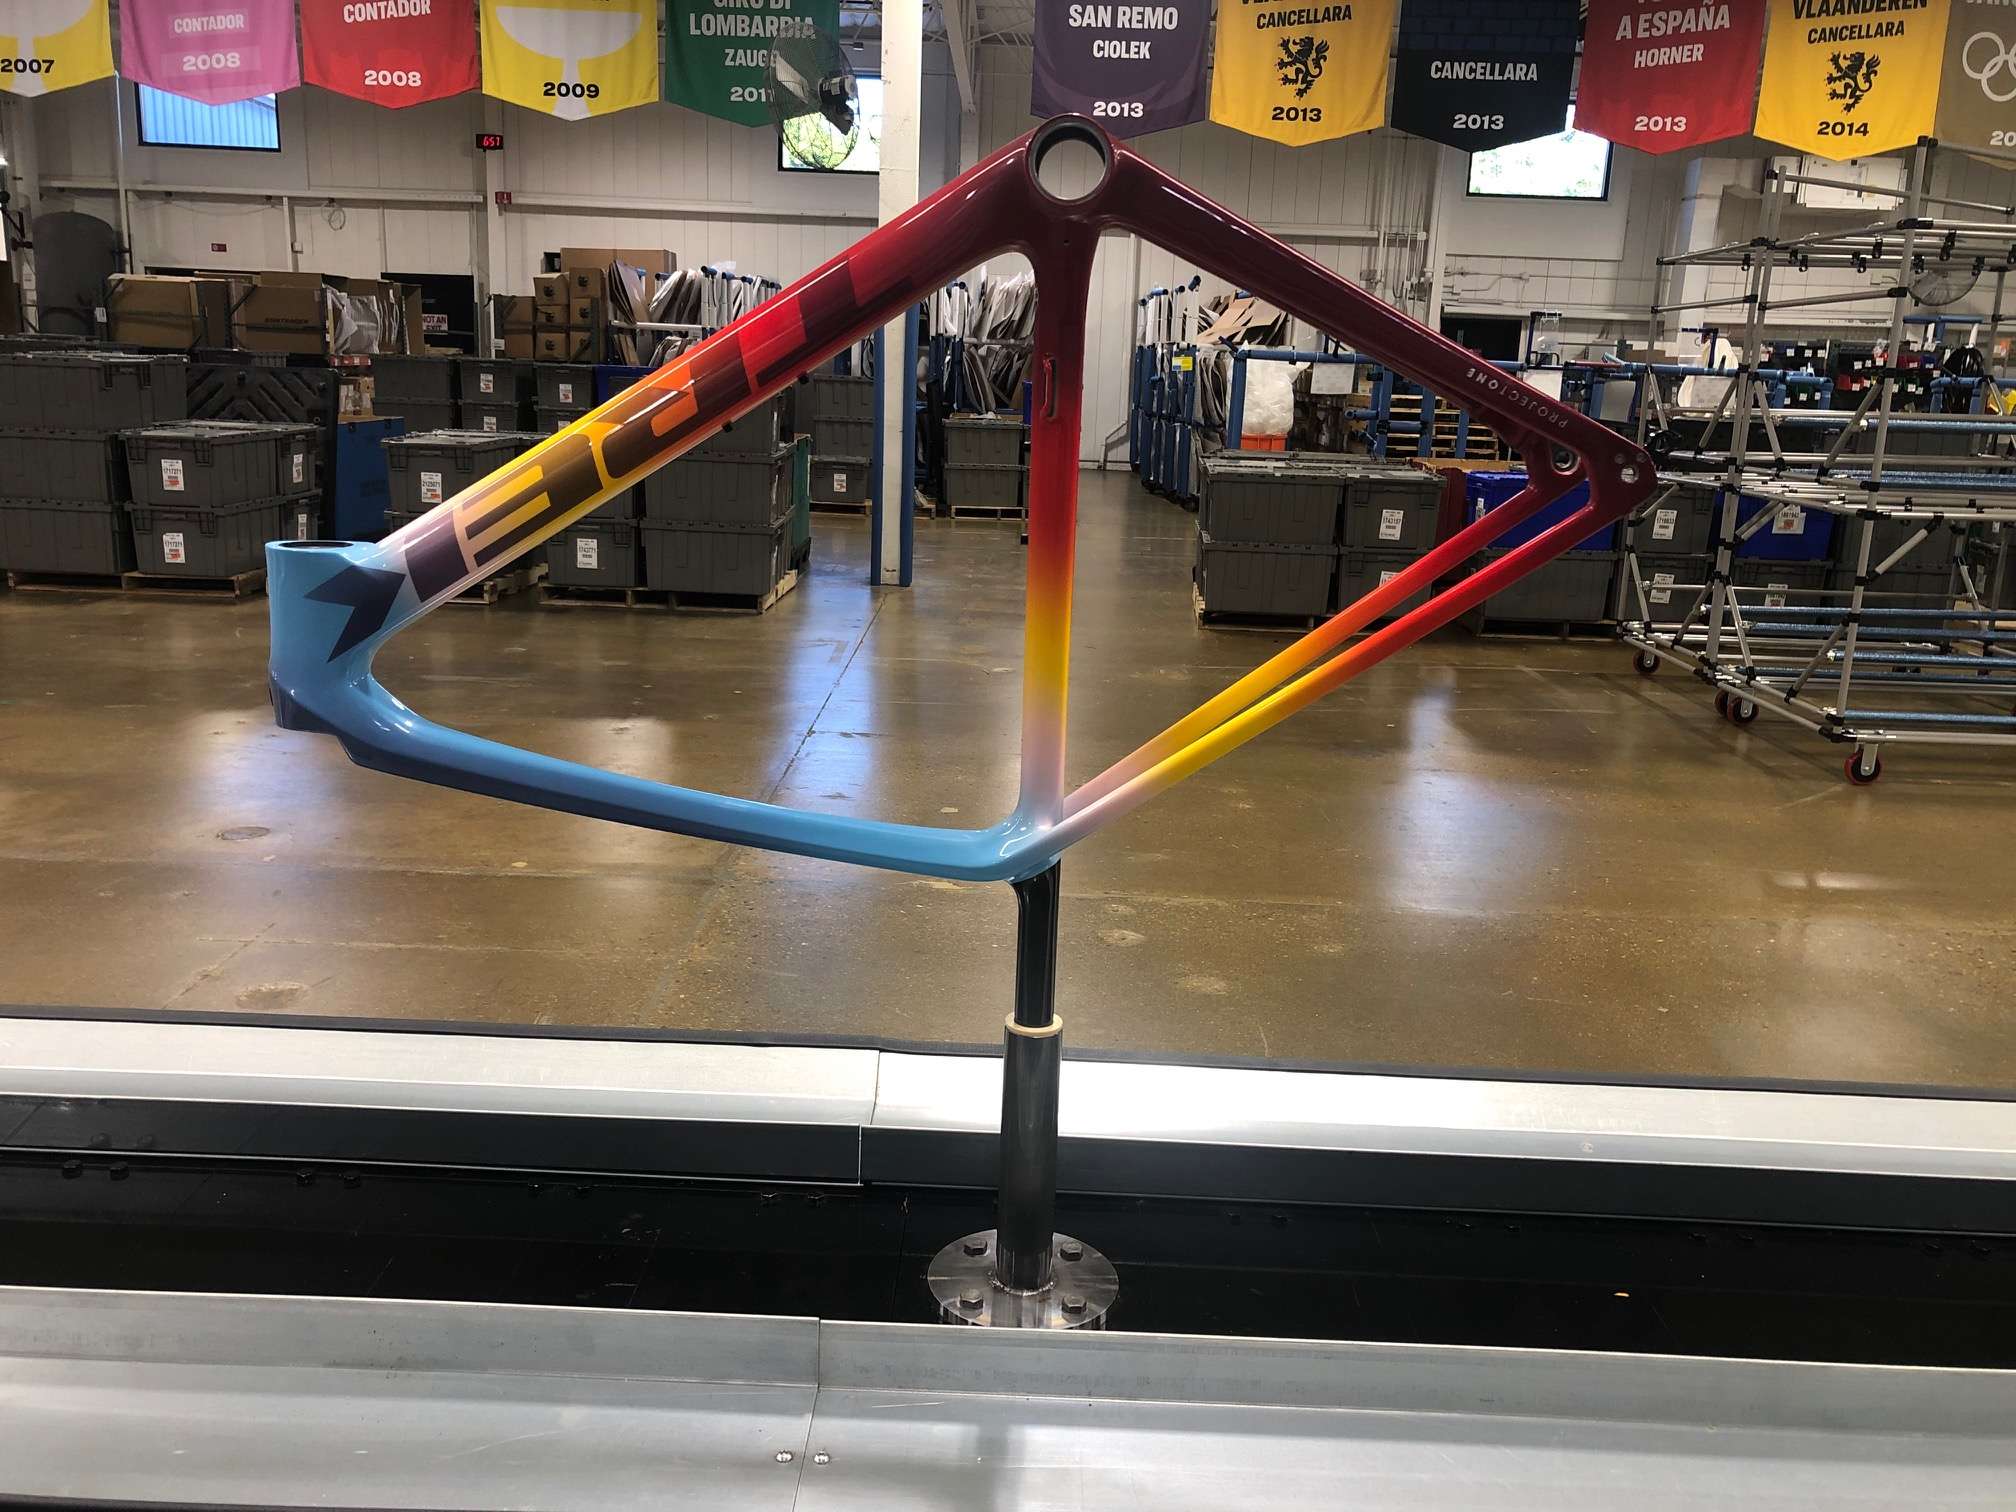 Trek frame, very colorful. Light blue, to yellow, to orange, to red, to pruple